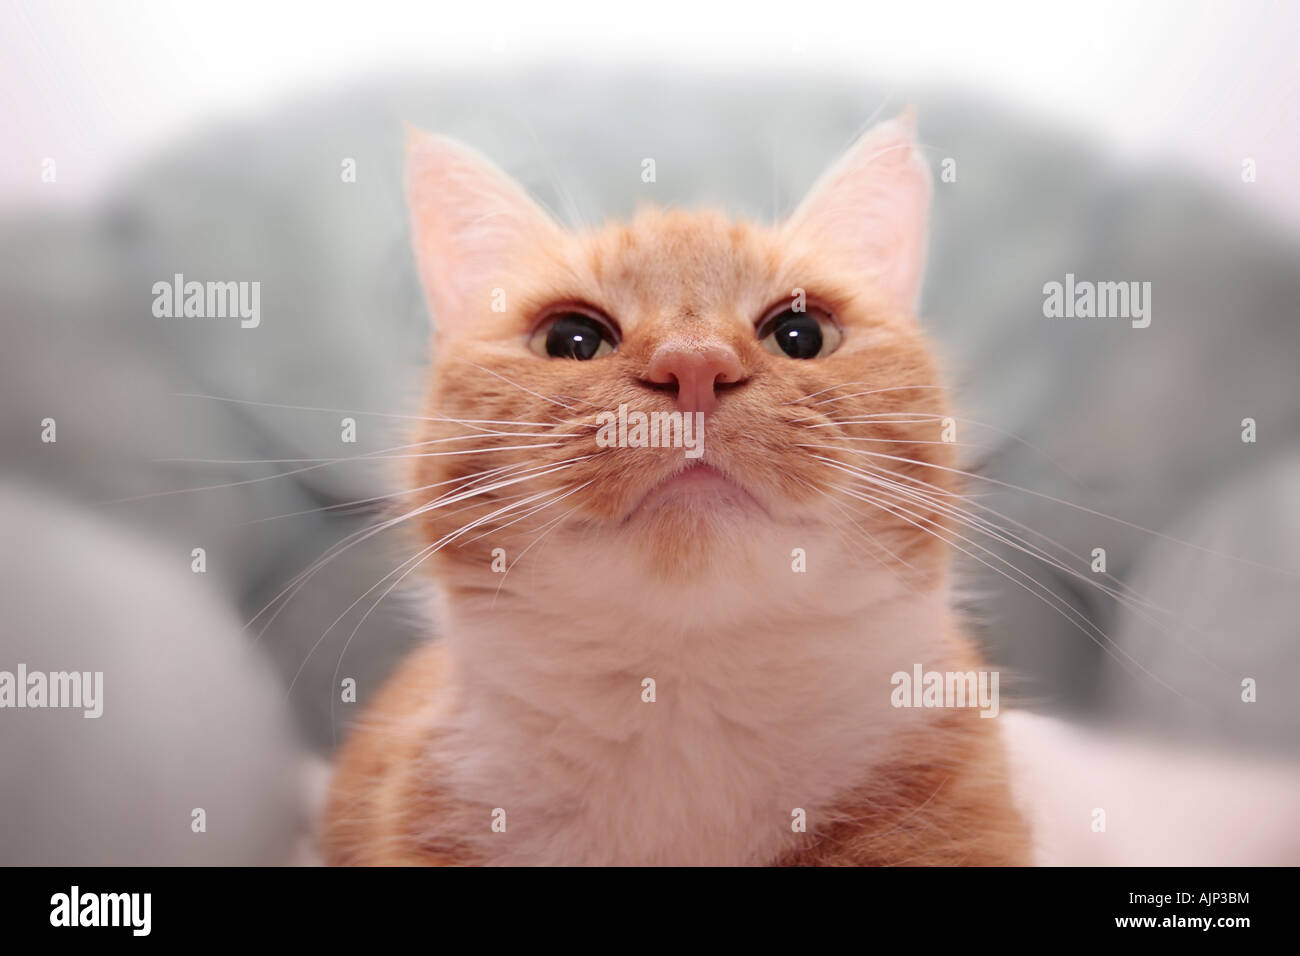 Adult female Ginger Cat (Felis catus) looking up at the camera with a slightly distorted view Stock Photo